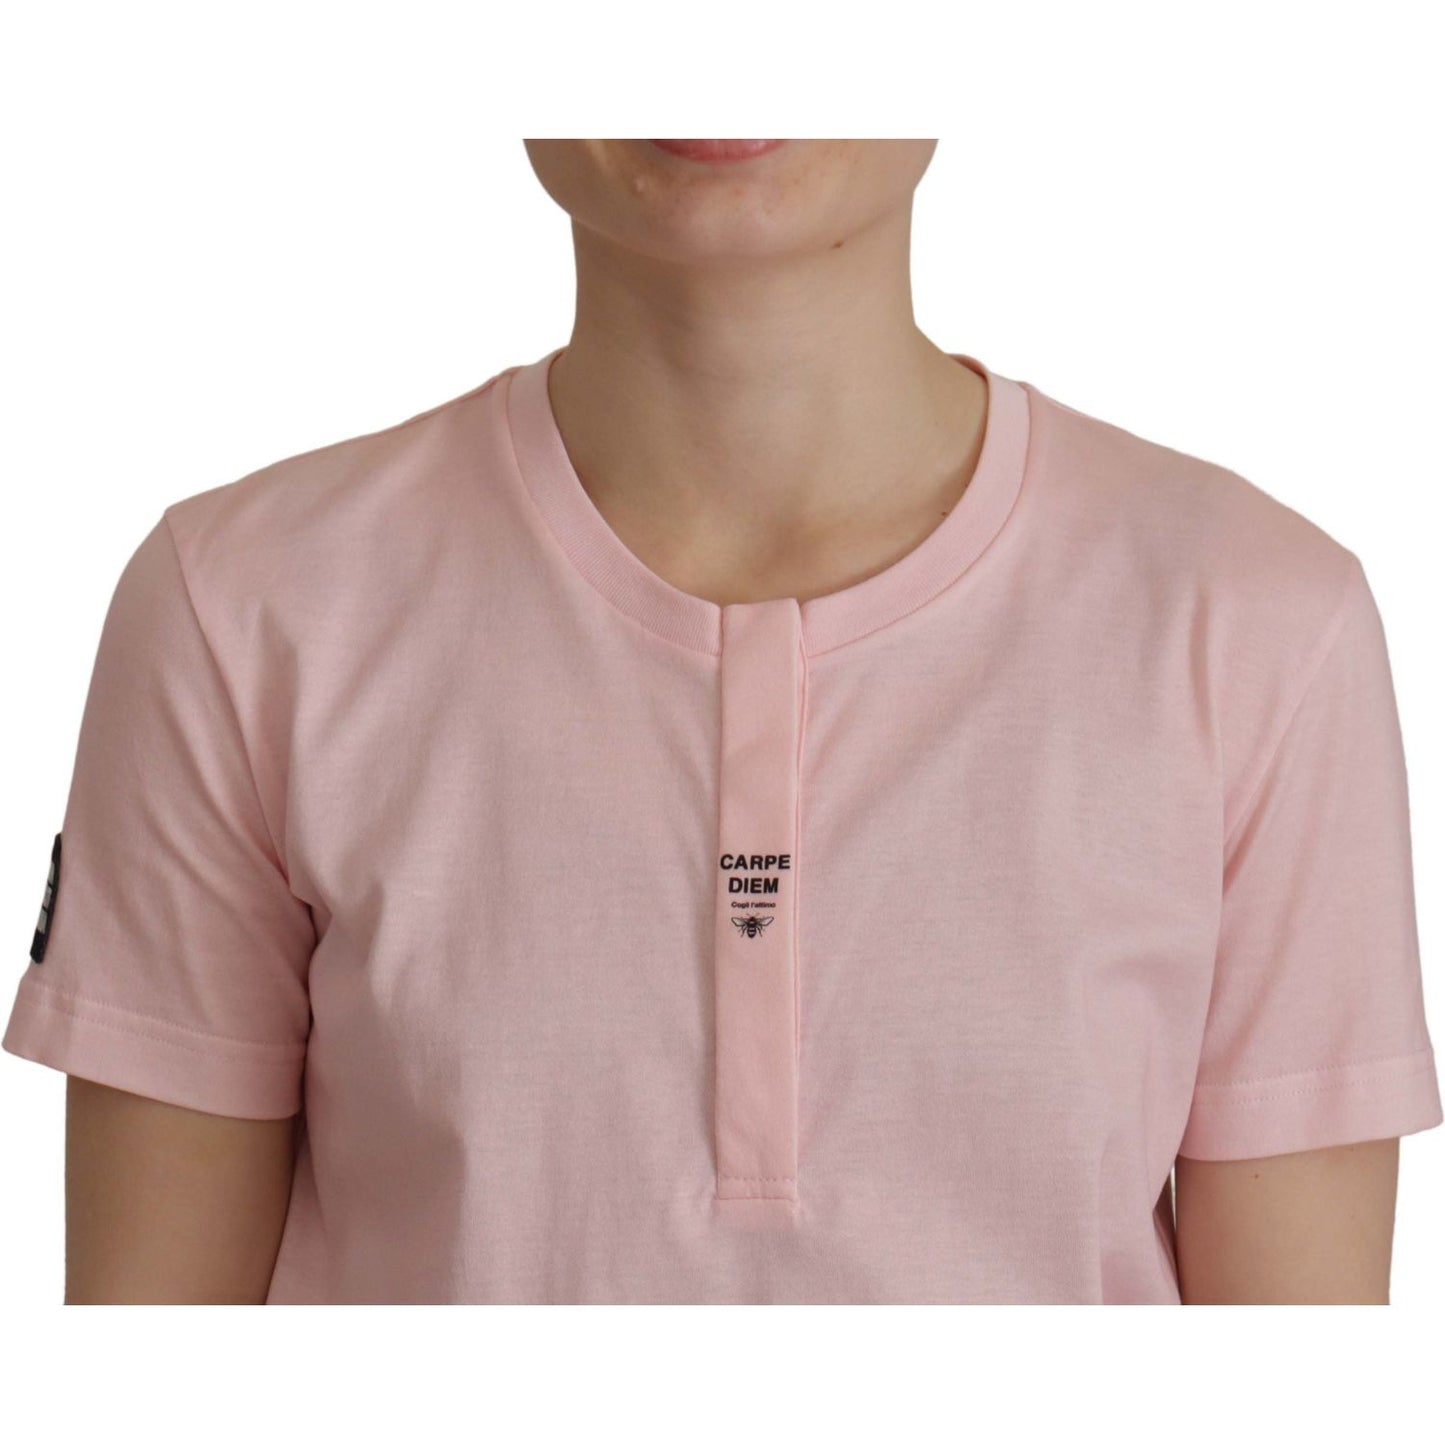 Dolce & Gabbana Floral Henley Cotton Tee in Pink pink-floral-cotton-henley-cotton-t-shirt